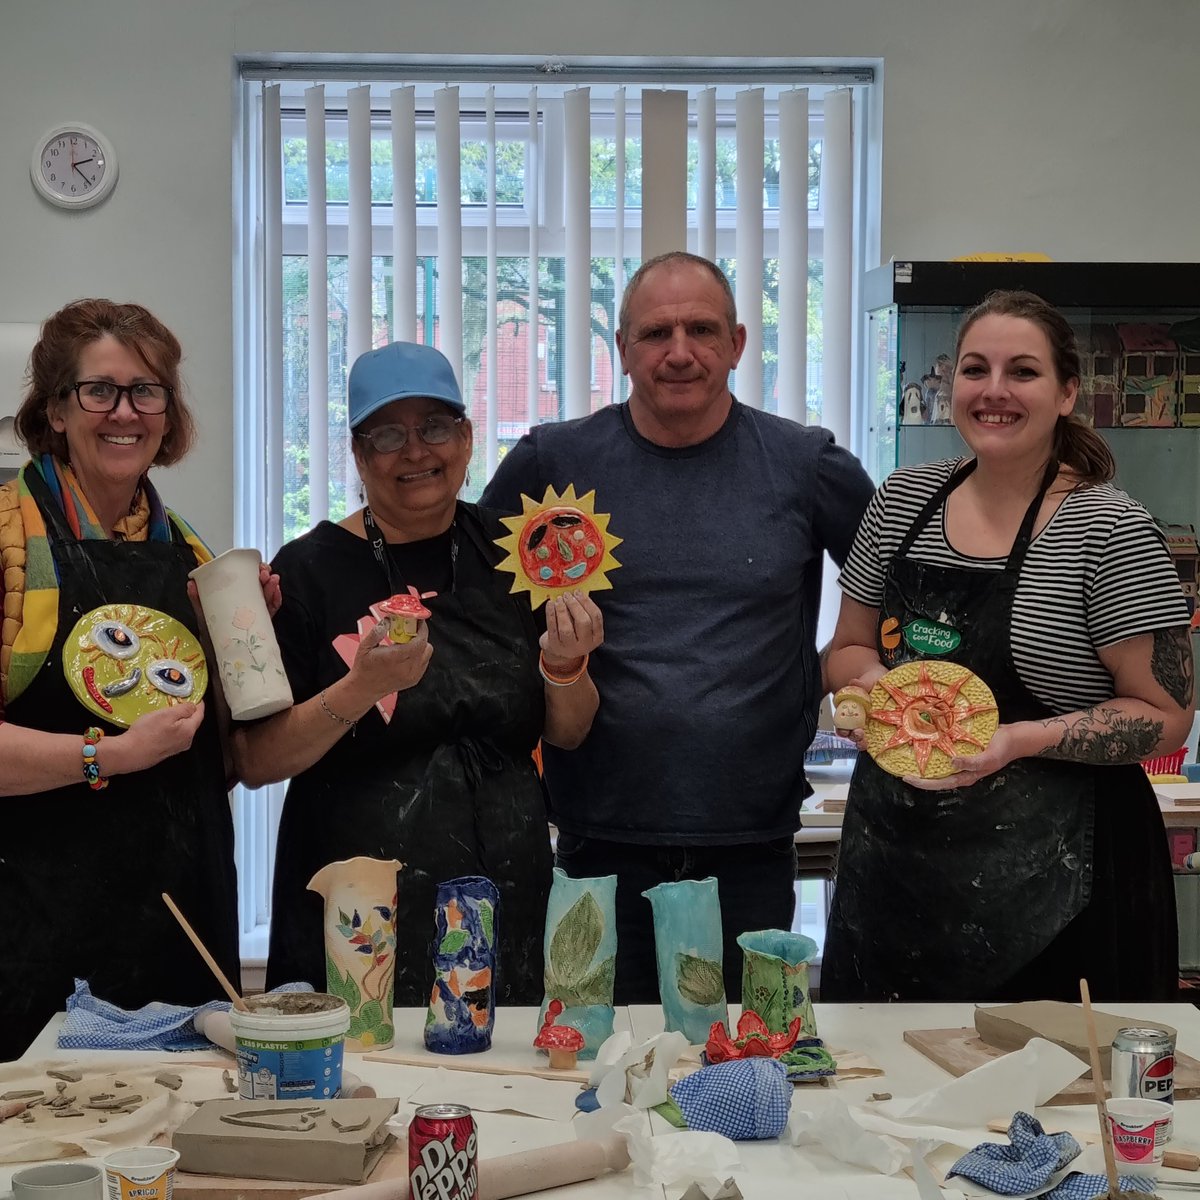 The ceramics class at No.93 are making some colourful vases & plates. @GMMH_NHS